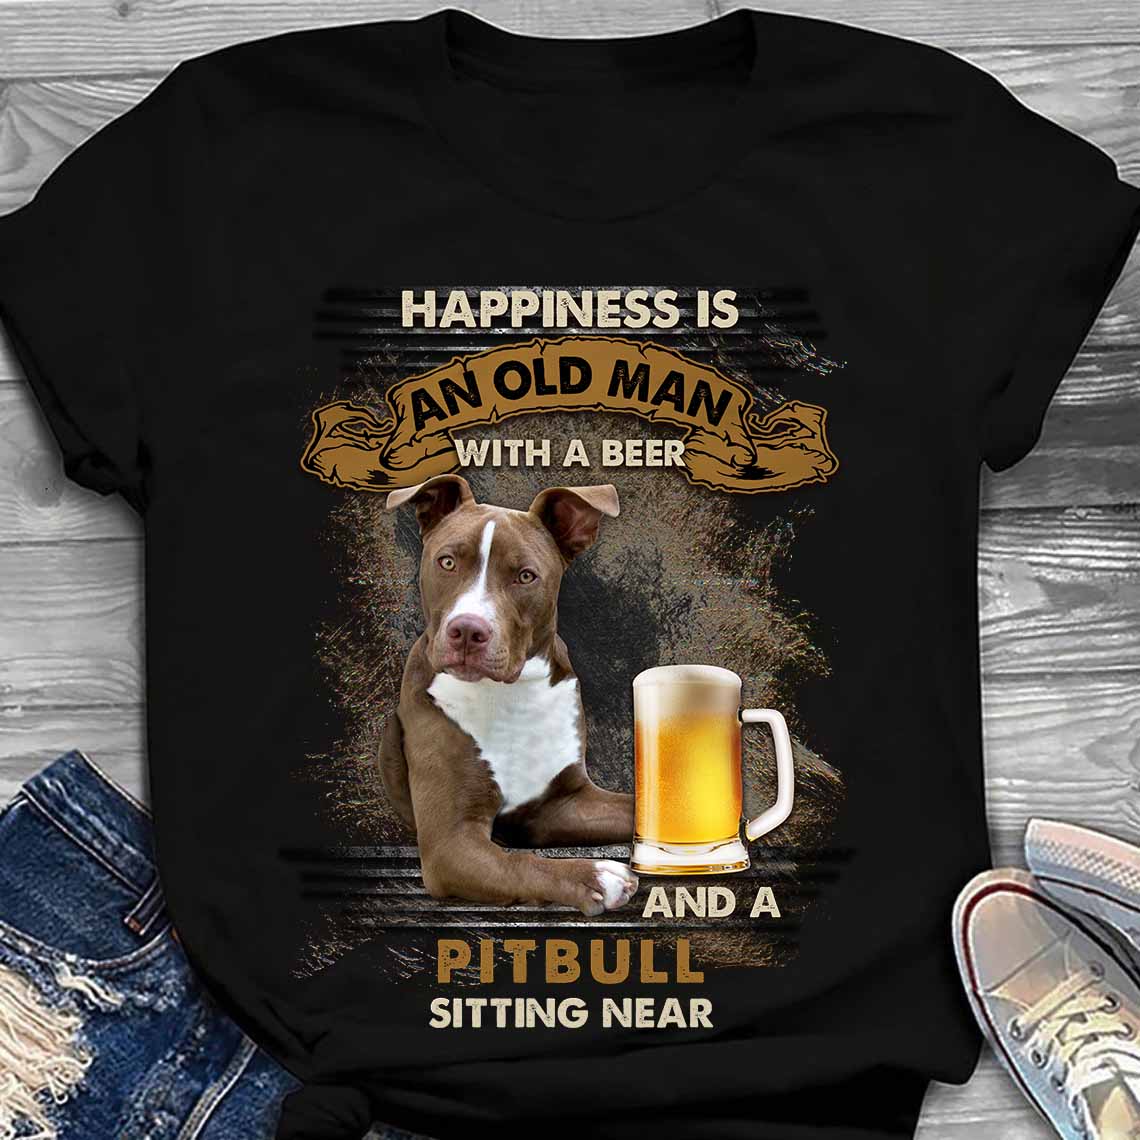 Happiness is an old man with a beer and a pitbull sitting near - Beer lover